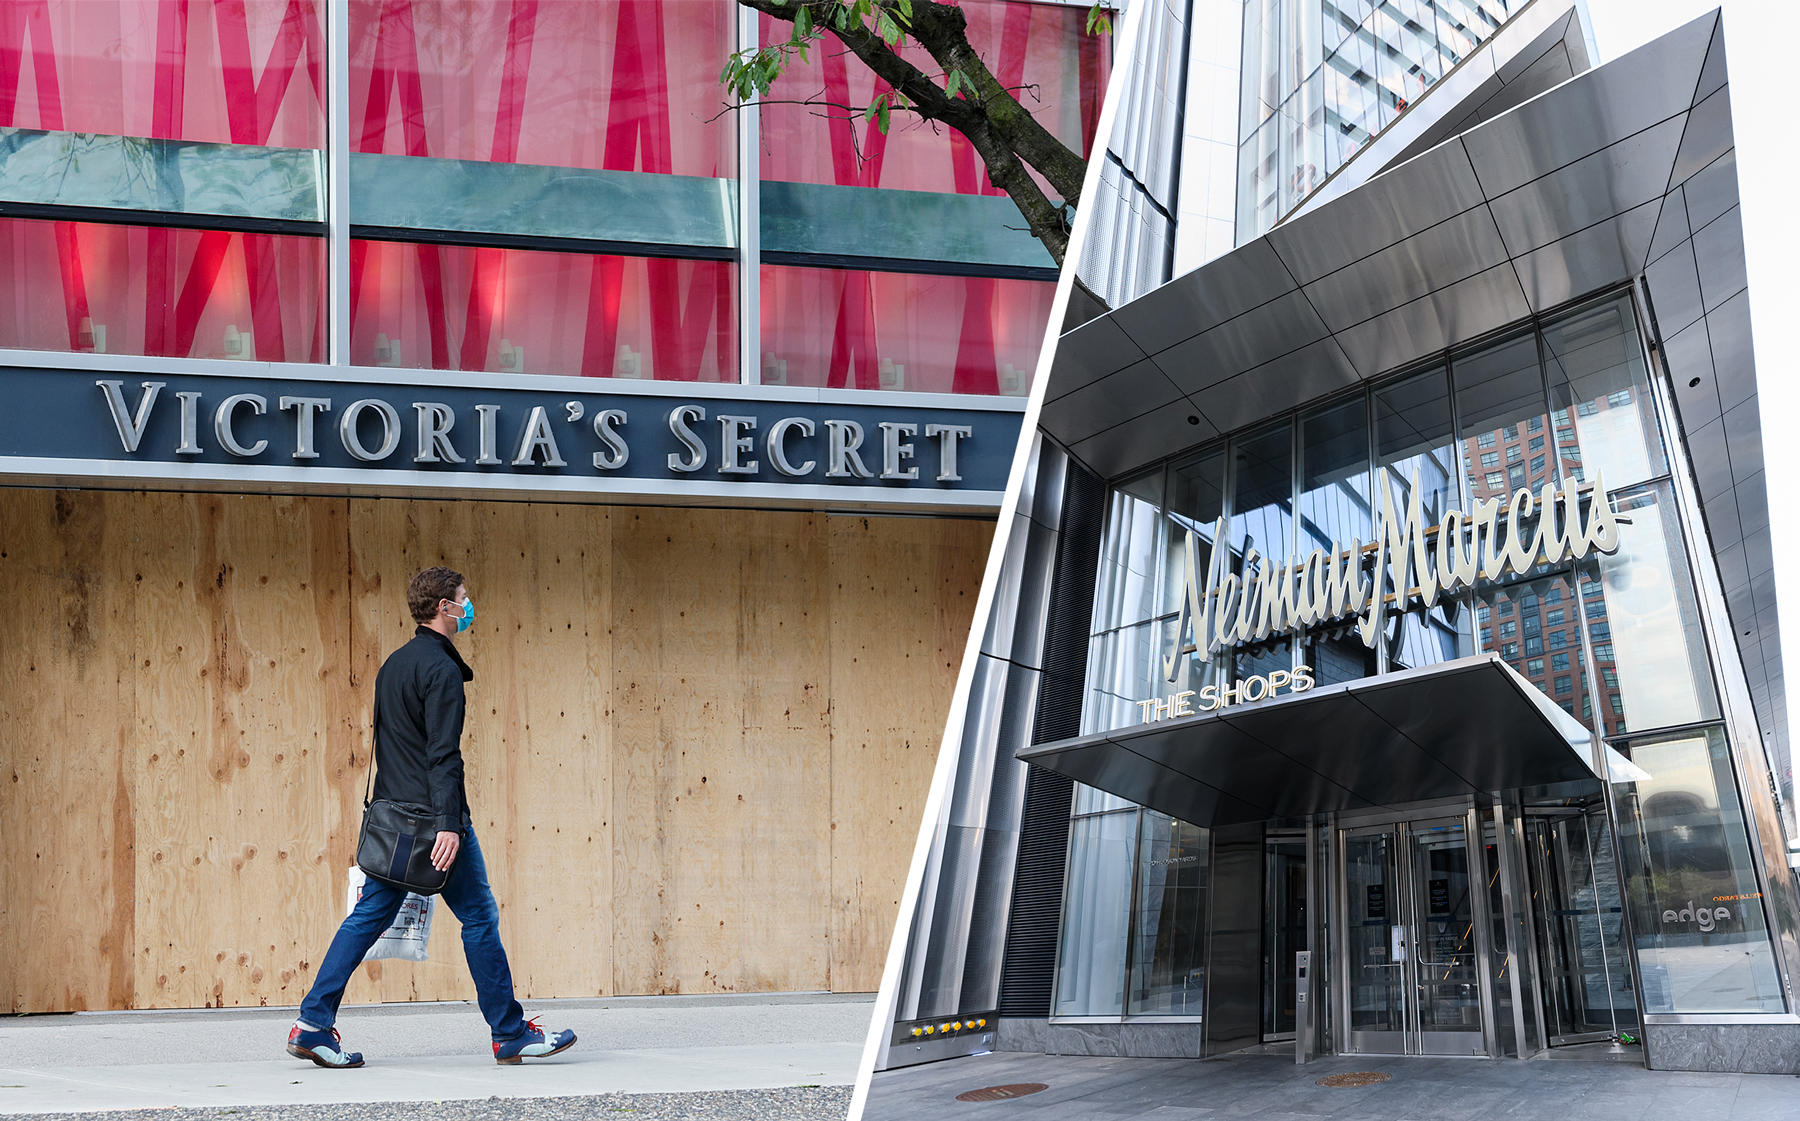 Victoria’s Secret’s parent company has canceled its deal with private equity firm Sycamore Partners, while Neiman Marcus is nearing a restructuring deal with a Pimco-led group. (Andrew Chin/Getty Images; Noam Galai/Getty Images)